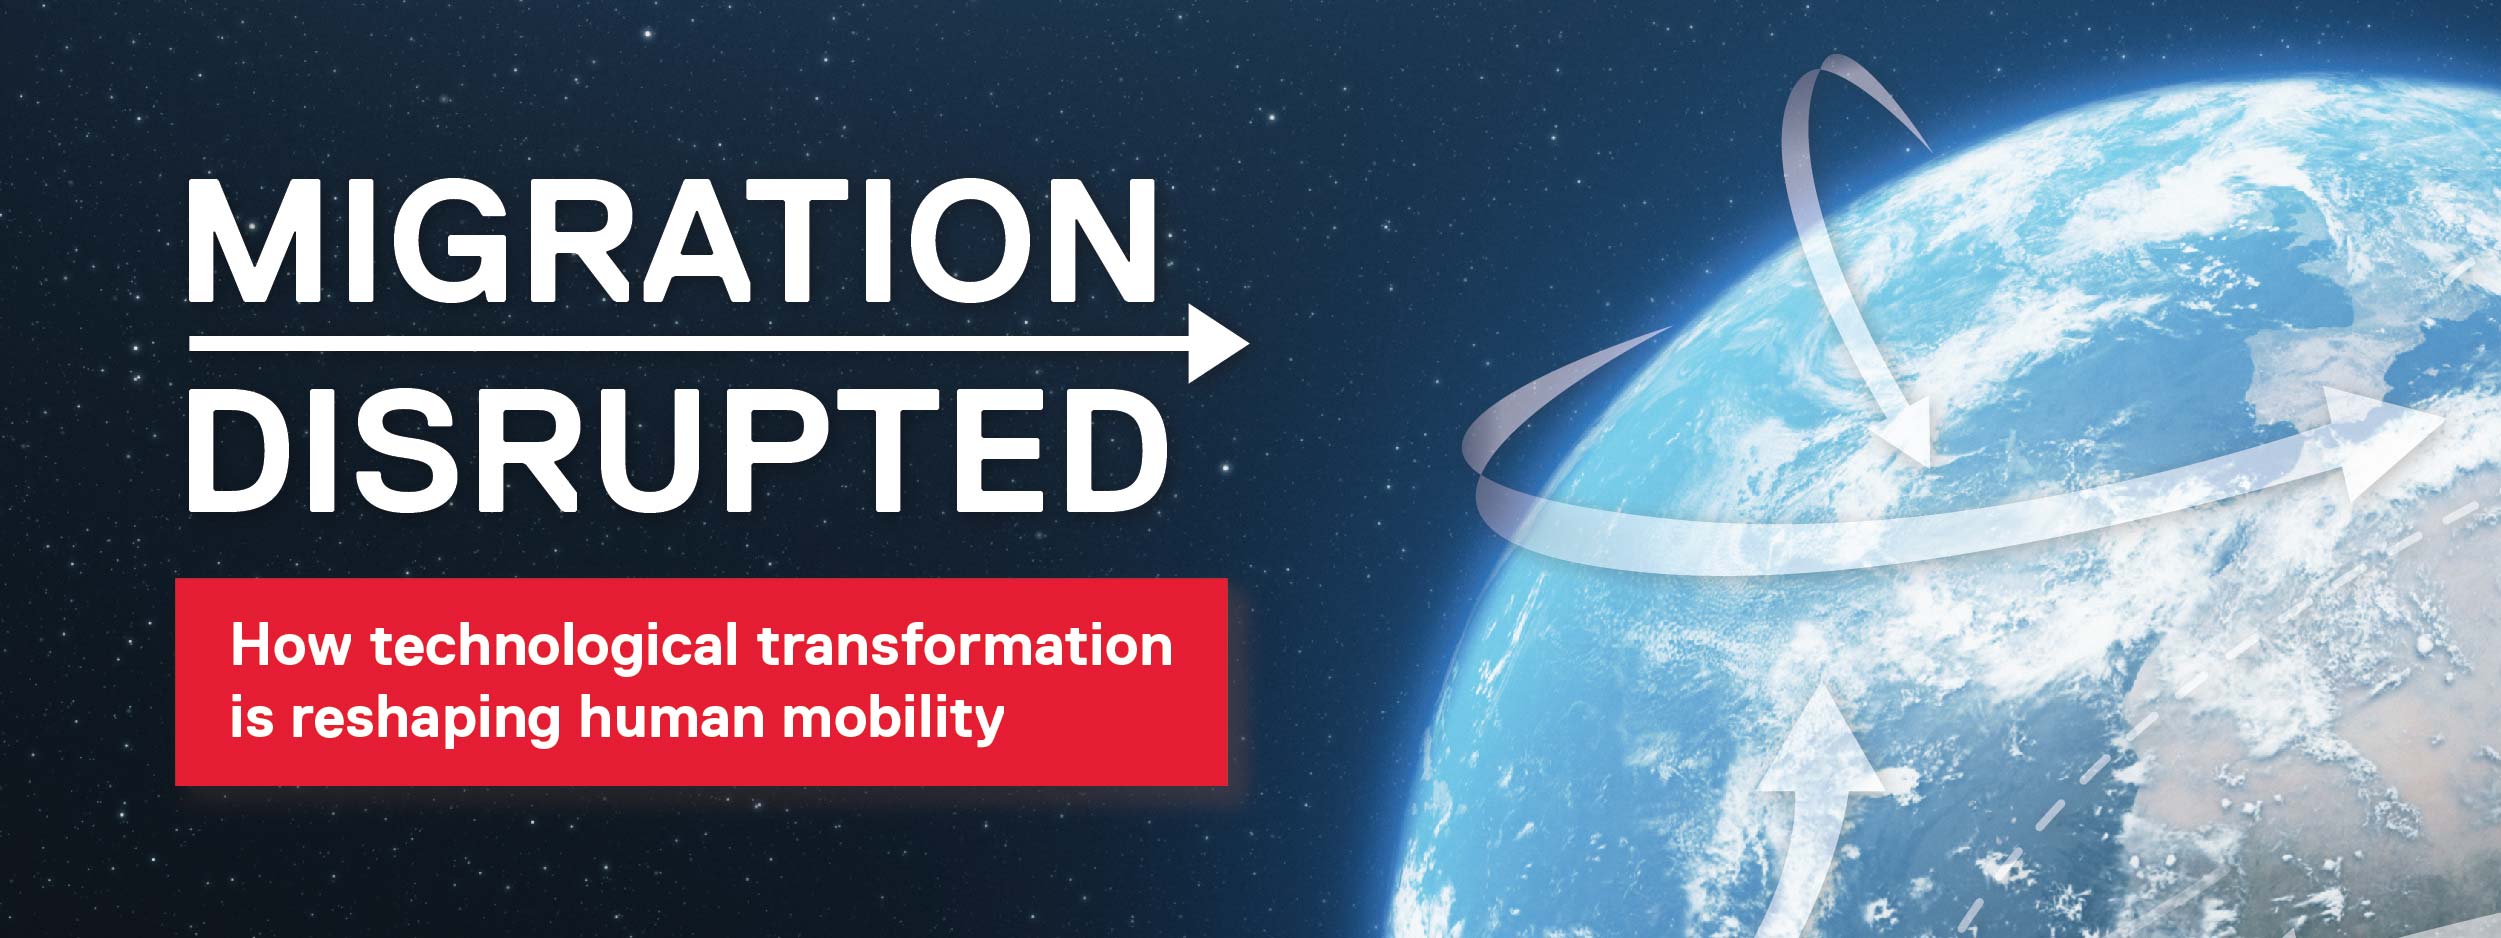 Migration Disrupted. How technological transformation is reshaping human mobility